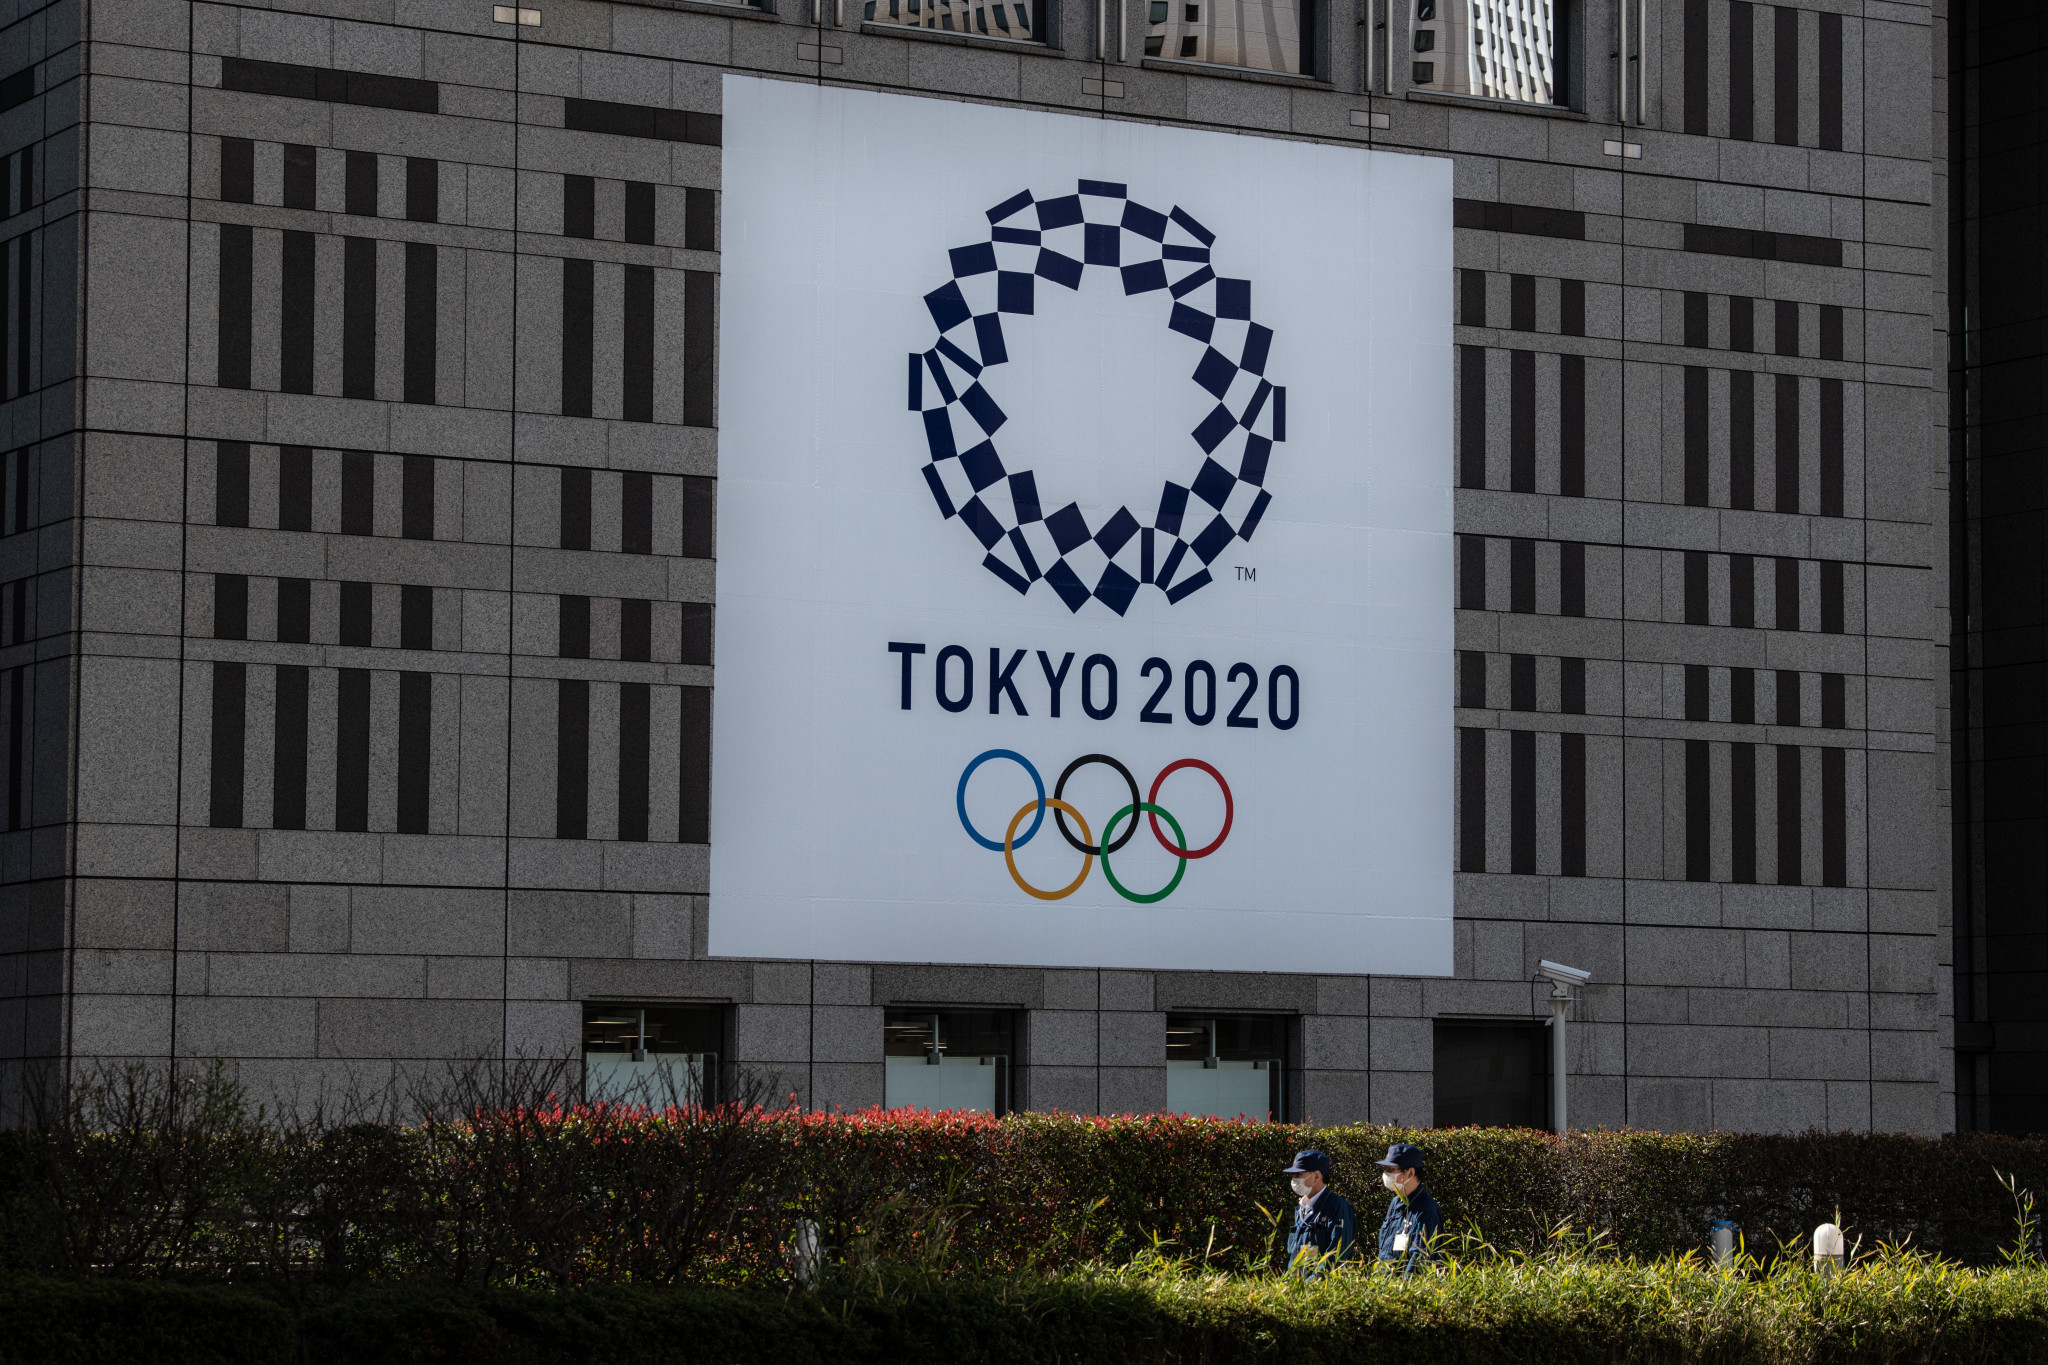 Tokyo 2020 will now be held in 2021 ©Getty Images